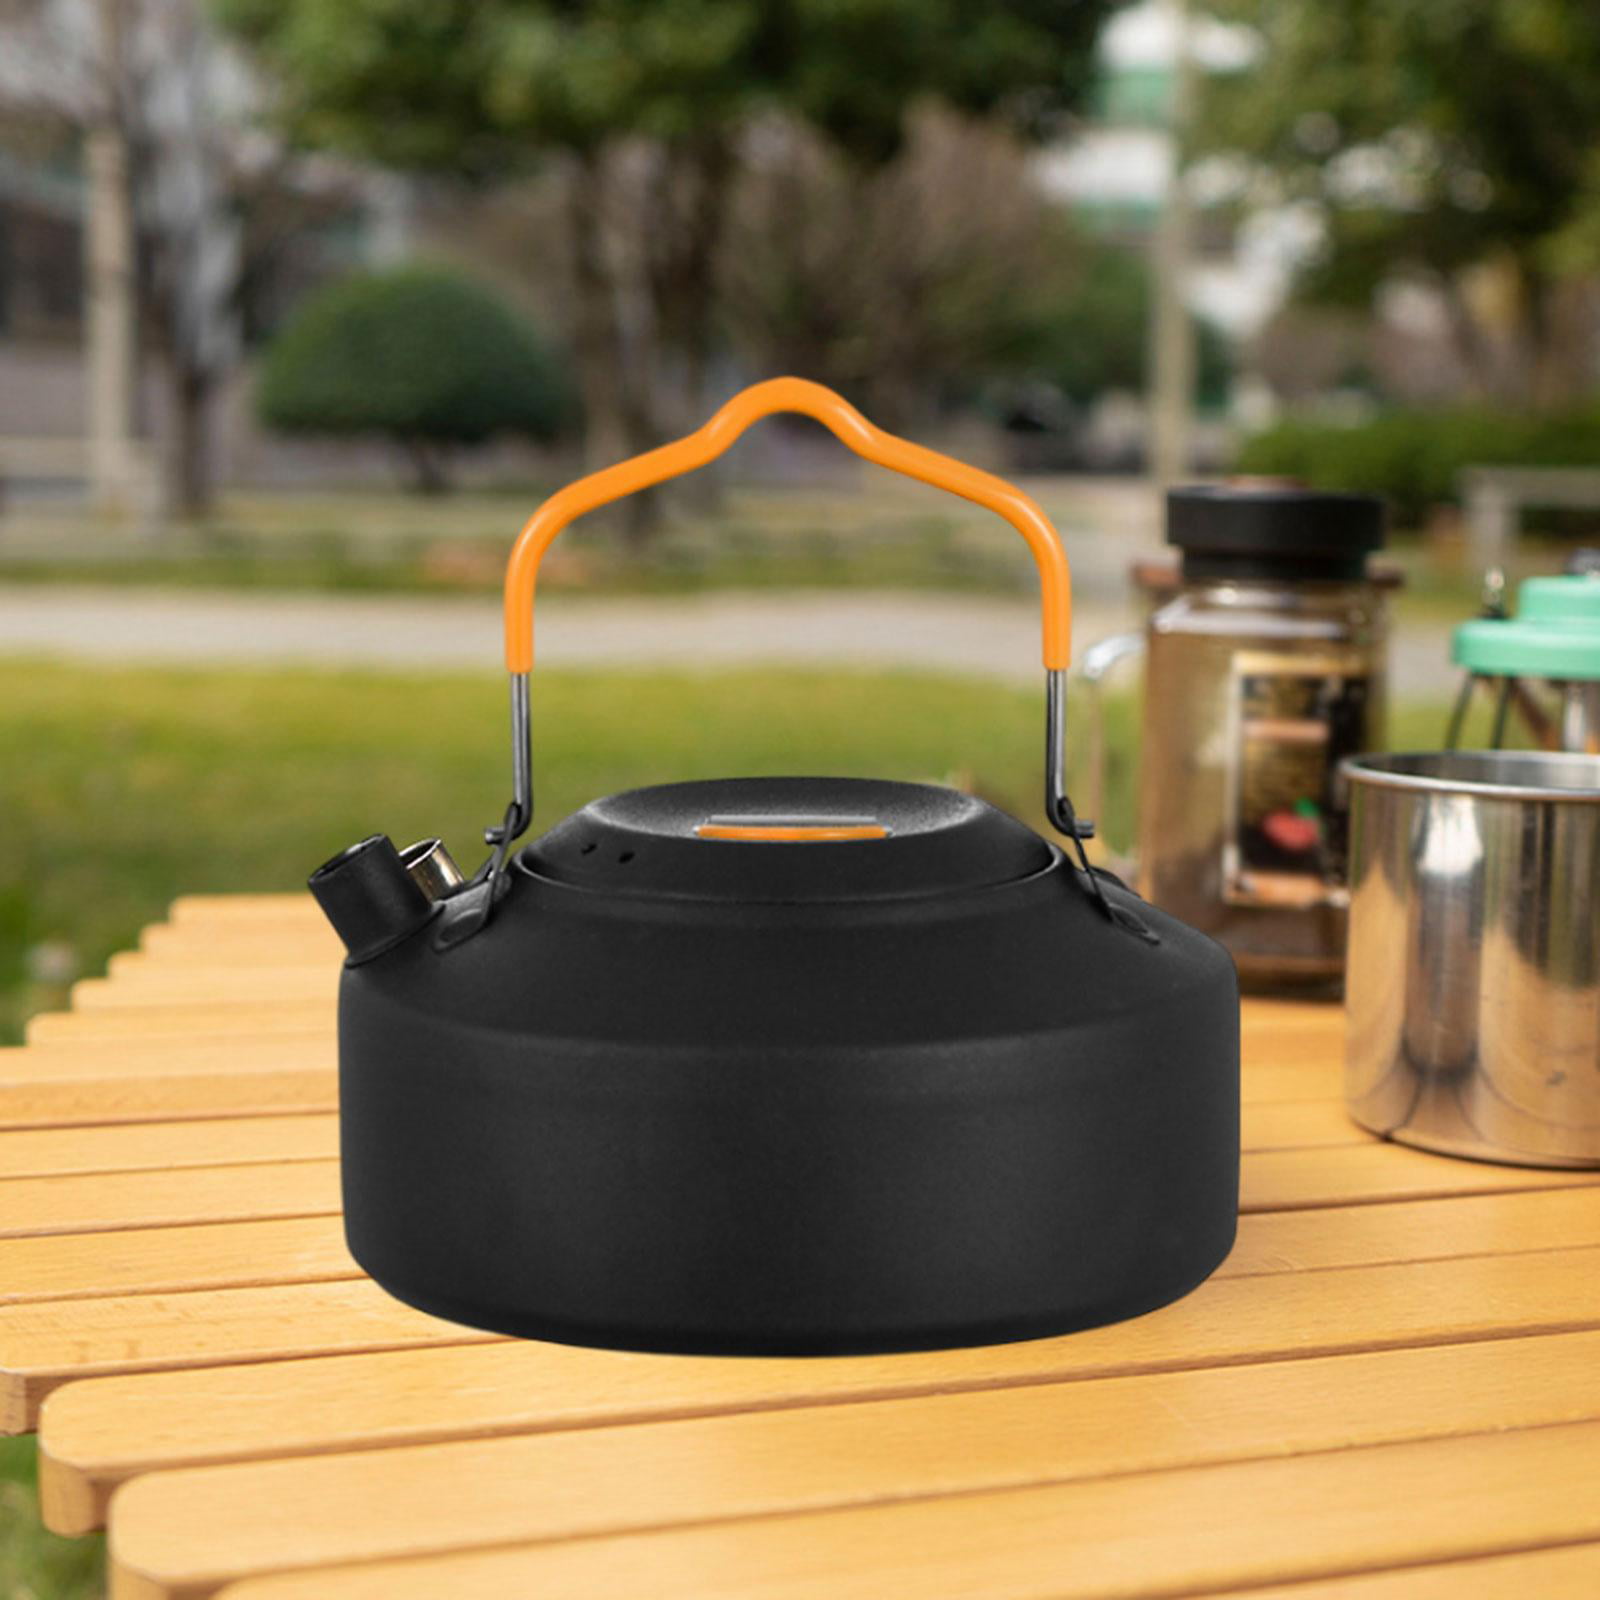 Portable Camping Kettle Tea Pot Water Kettle Coffee Pot Cookware Campfire Kettle, Size: 17.5cmx7.5cm, Other